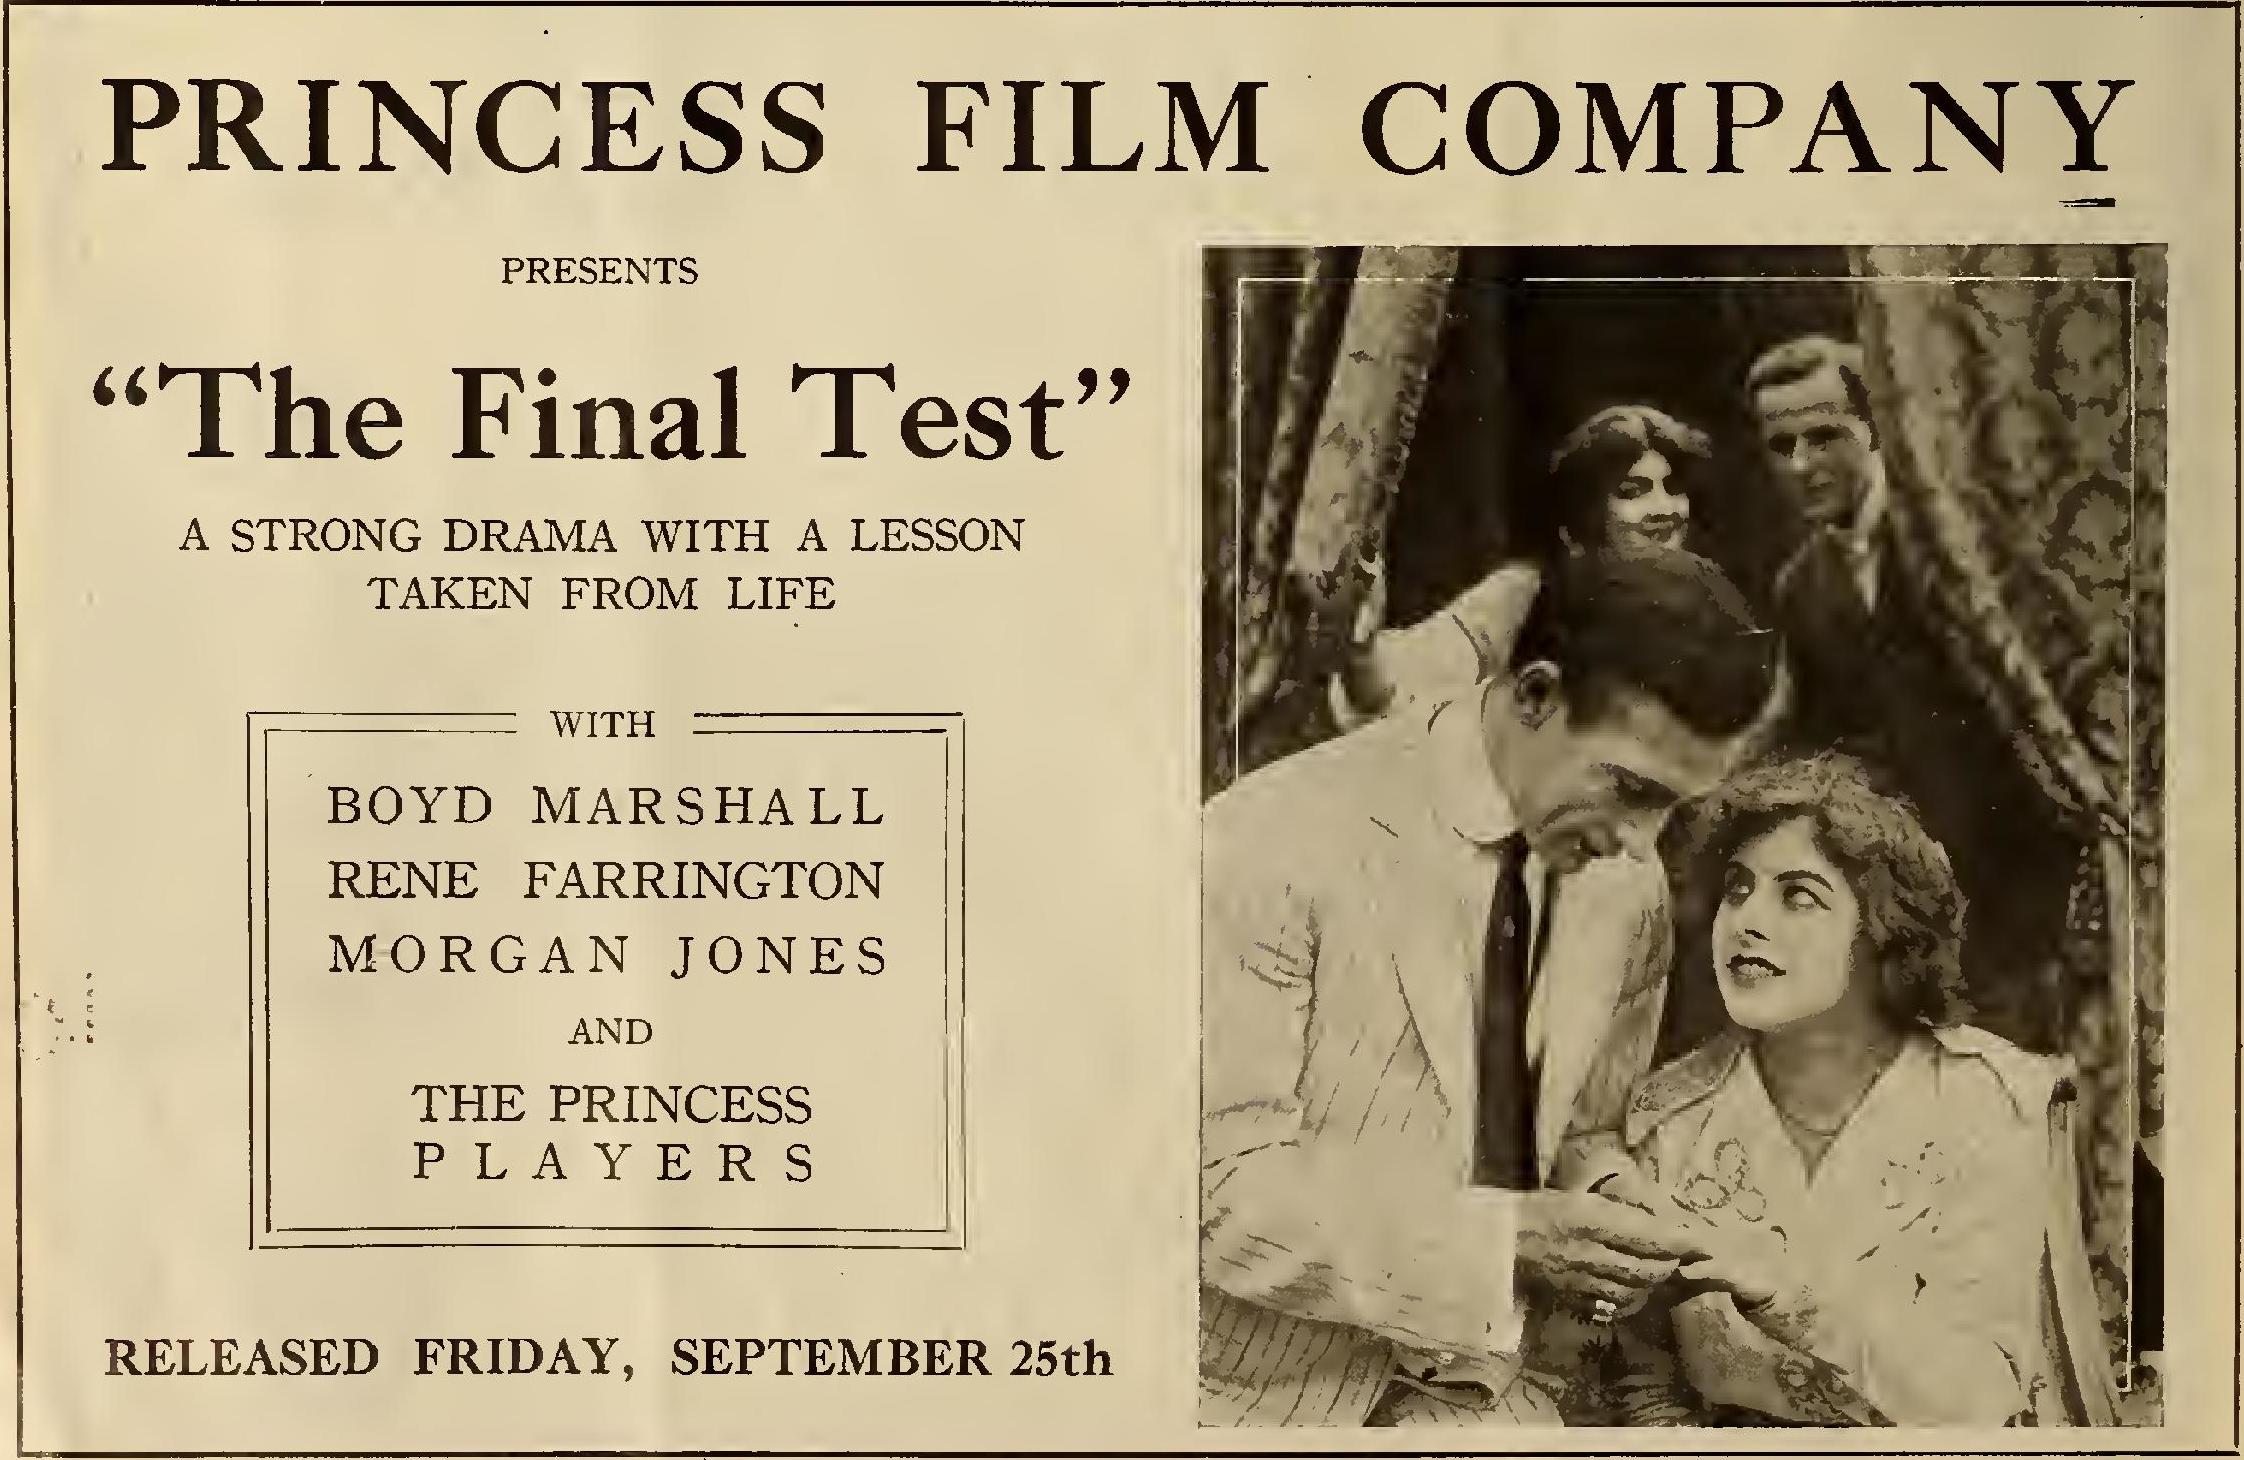 https://upload.wikimedia.org/wikipedia/commons/f/fc/Princess_Film_Company%2C_The_Final_Test_ad_detail%2C_from-_Reel_Life_%28Sep_1914-Mar_1915%29_%28IA_reellife05unse%29_%28page_10_crop%29.jpg